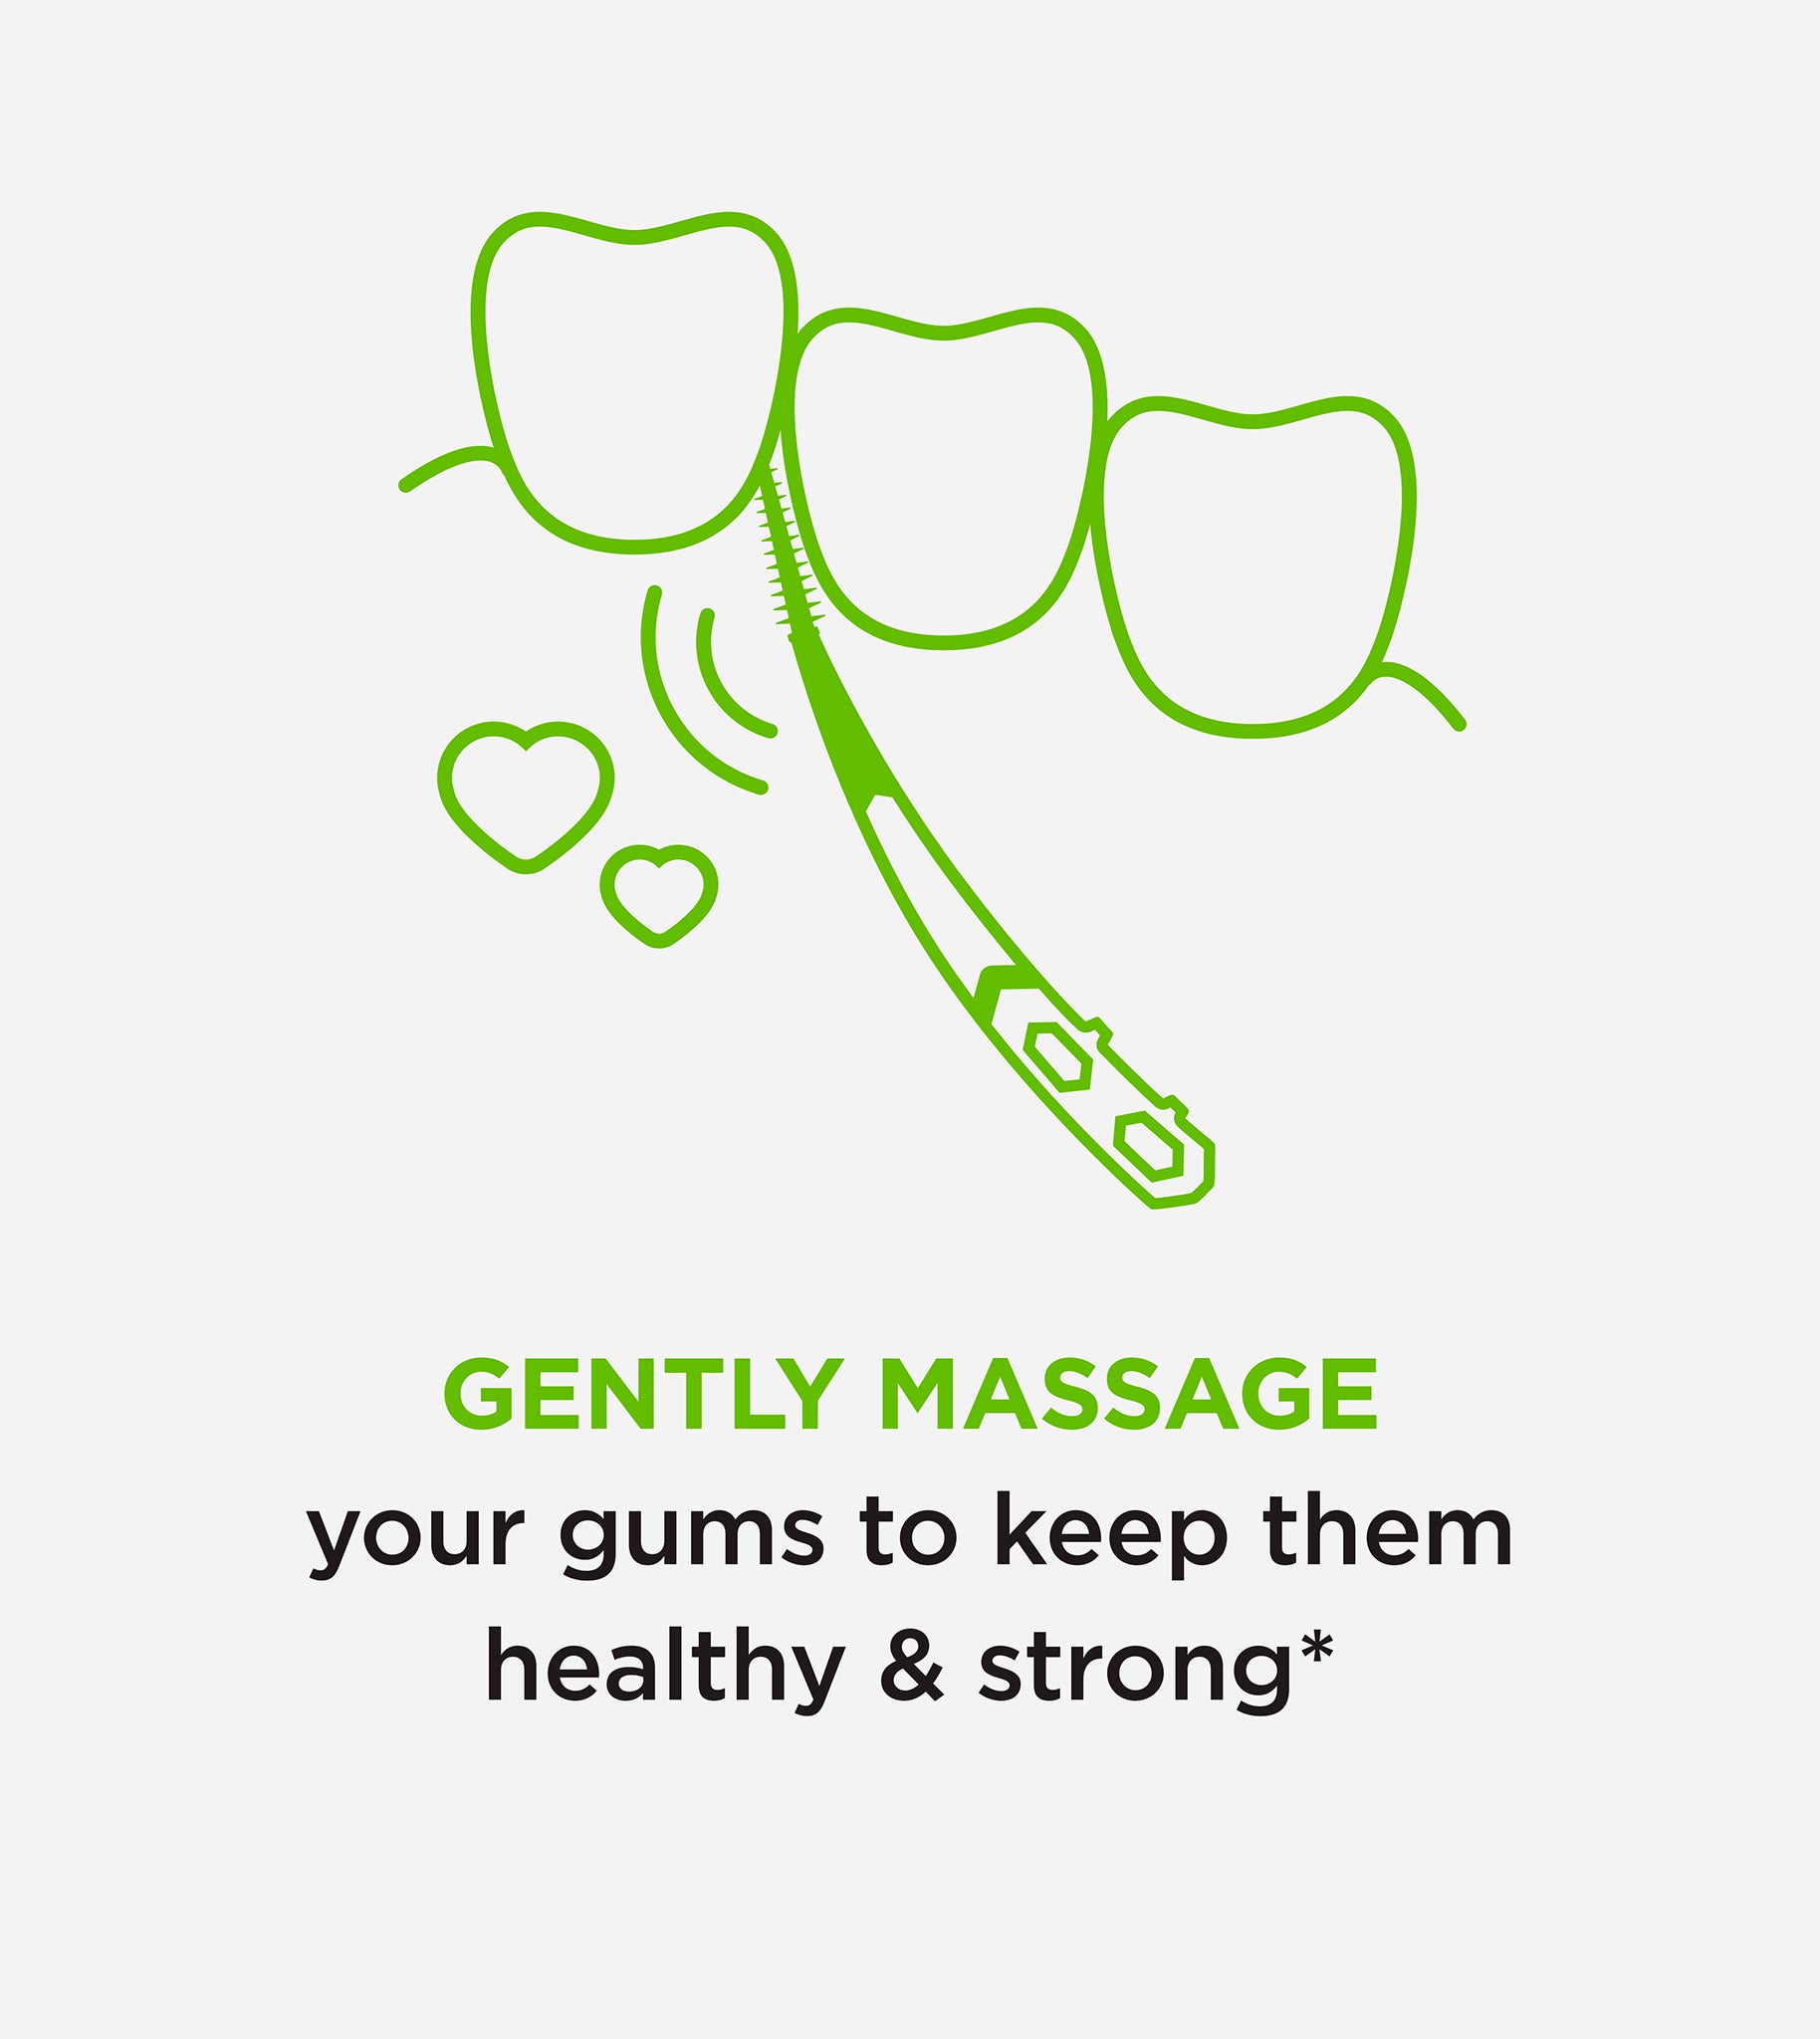 Gently massage your gums to keep them healthy and strong